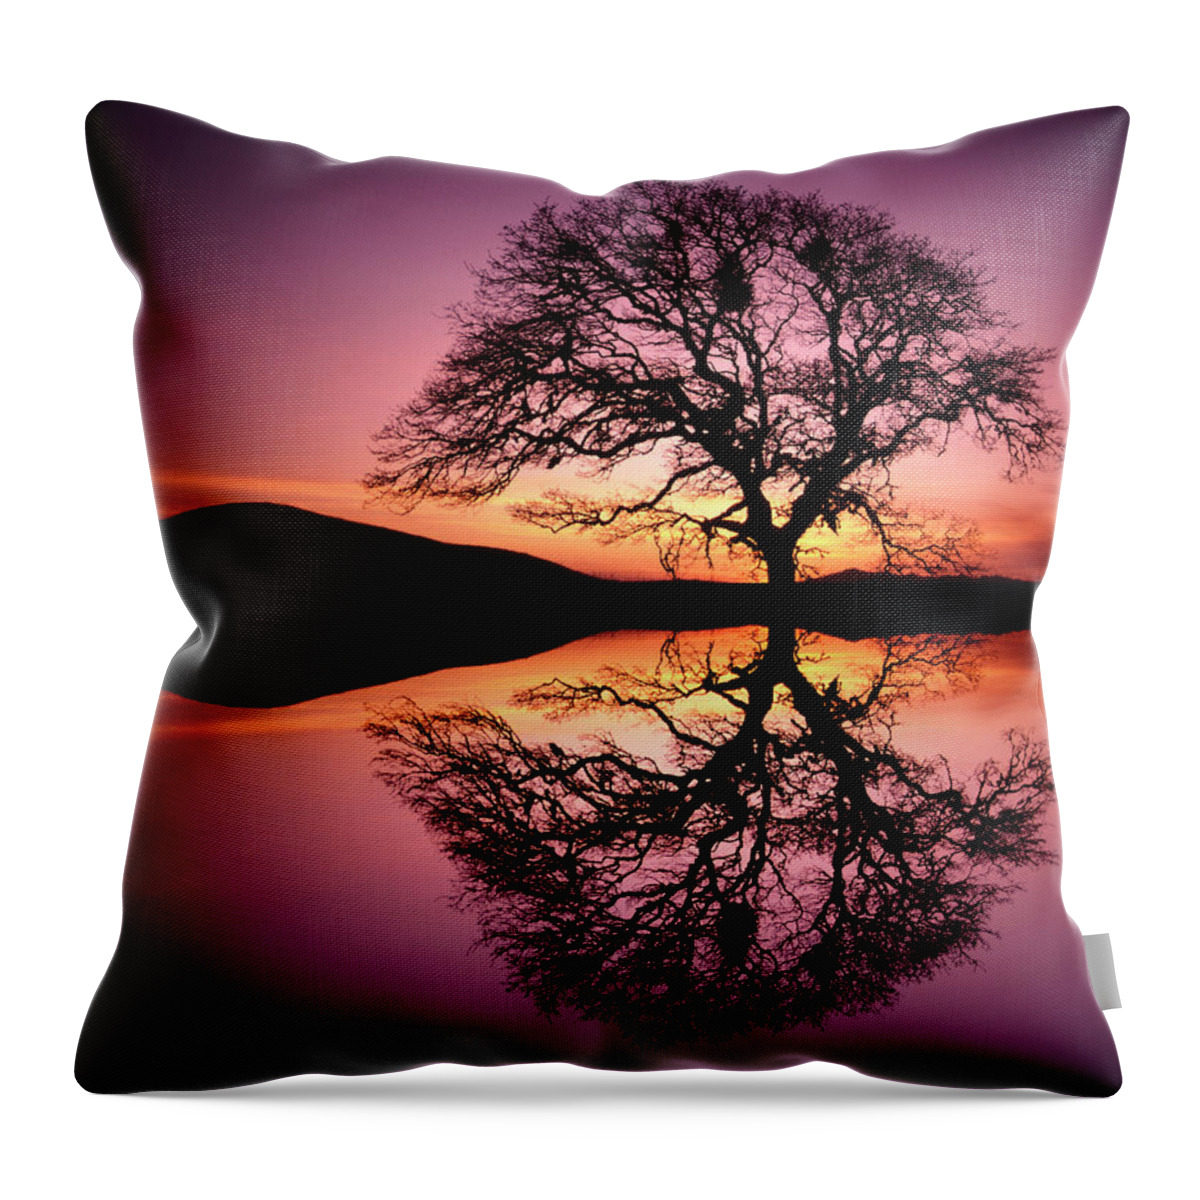 Tranquility Throw Pillow featuring the photograph Oak Tree Reflection At Sunset by Steve Satushek